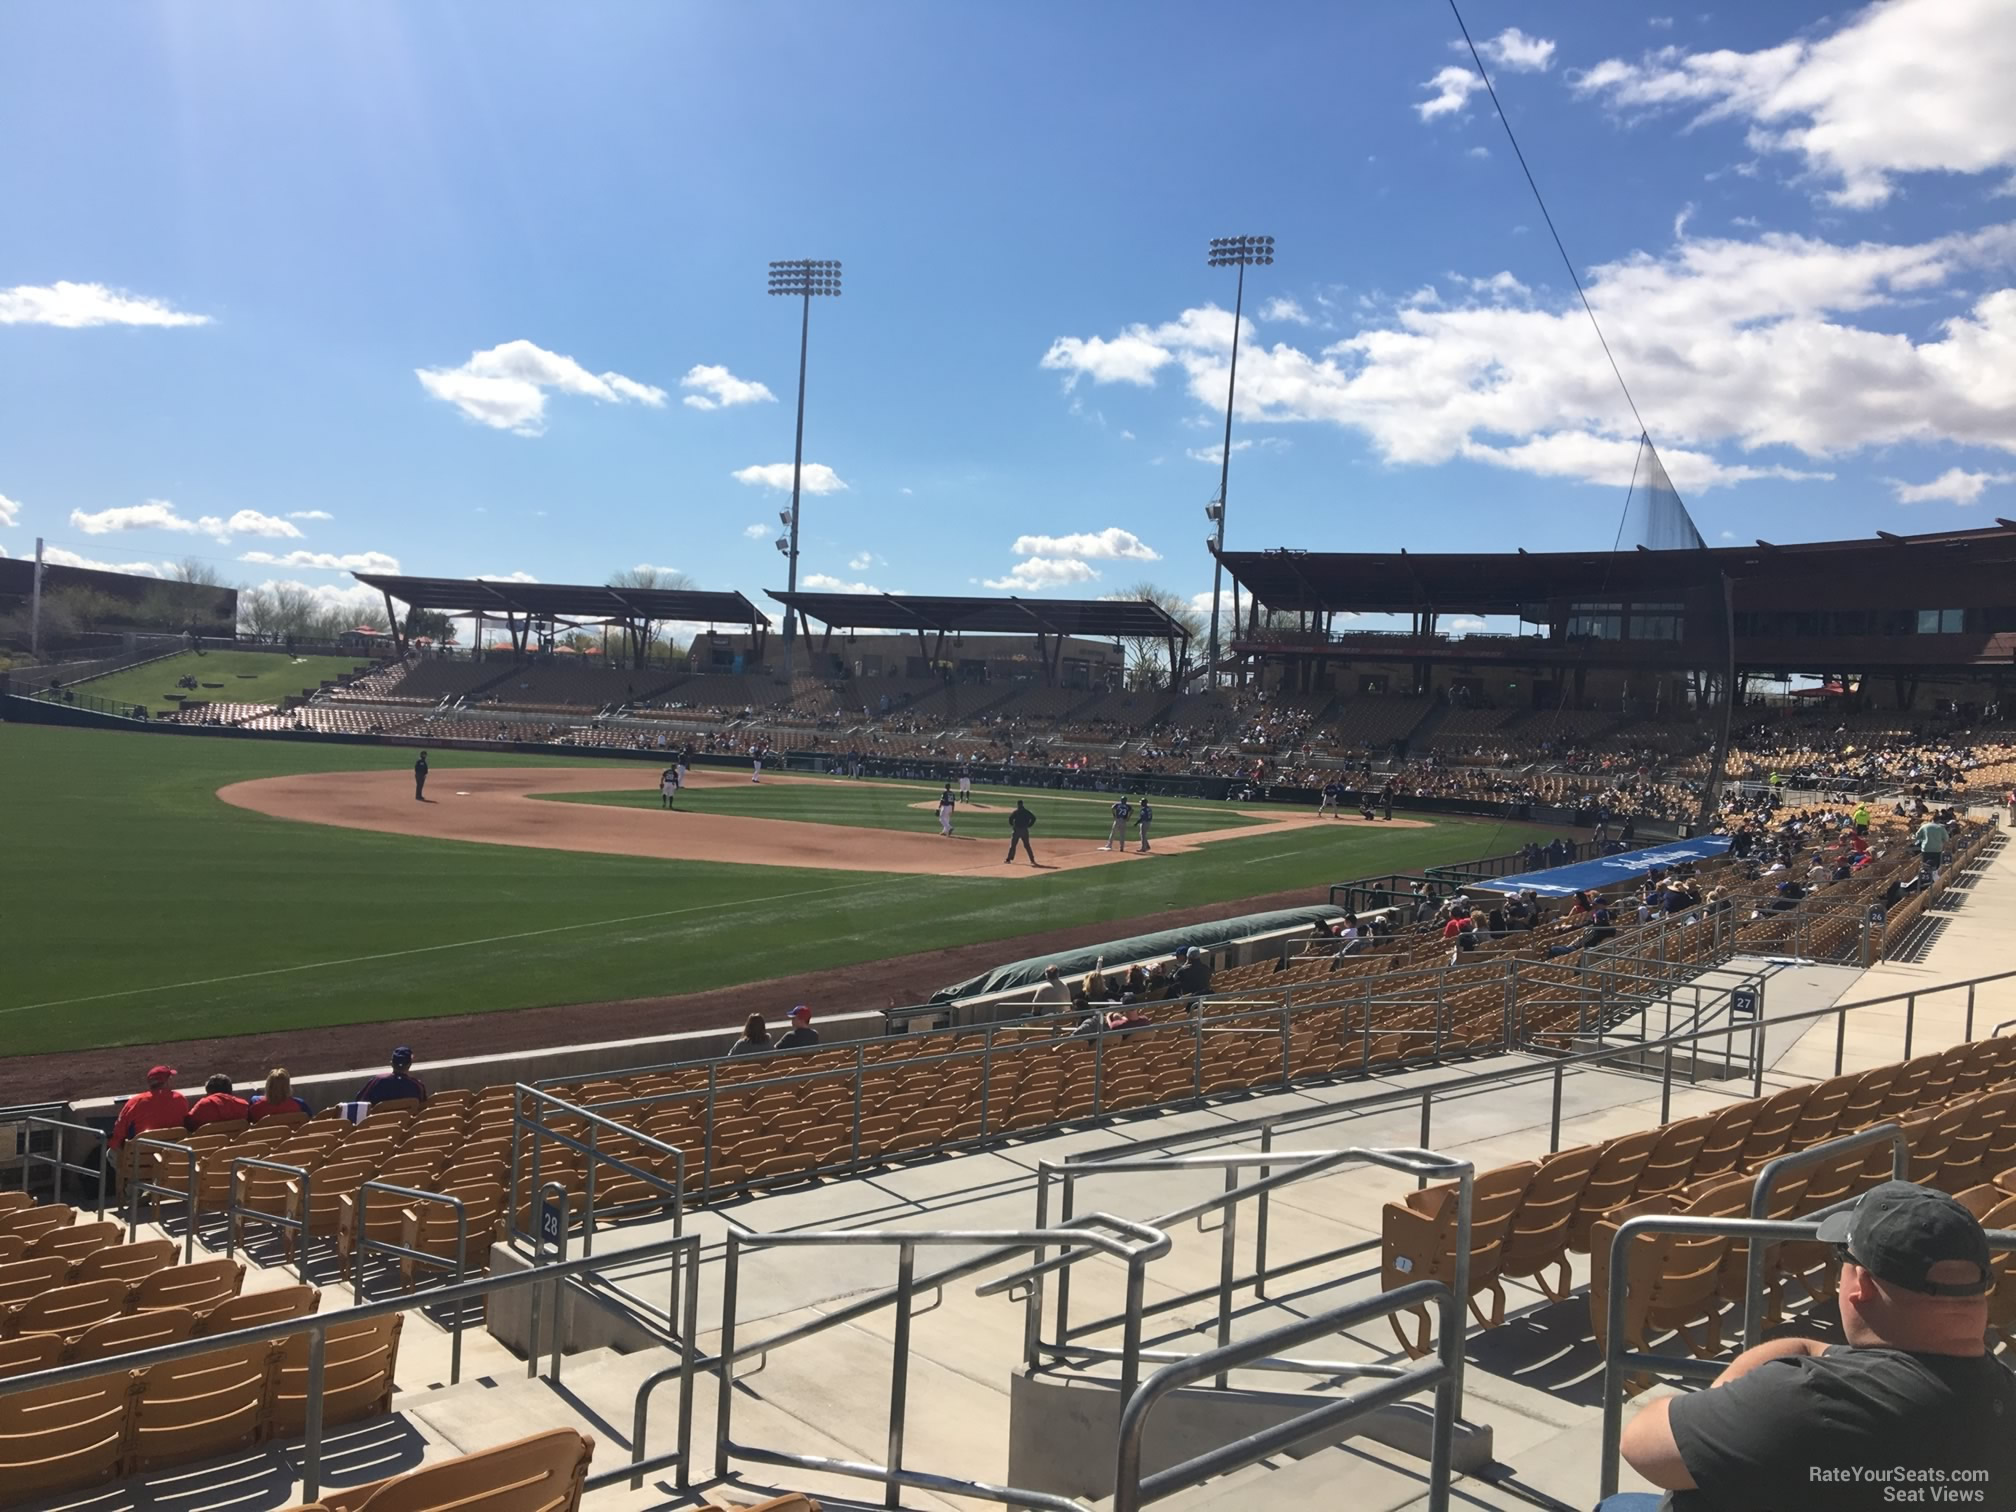 section 128, row 5 seat view  - camelback ranch